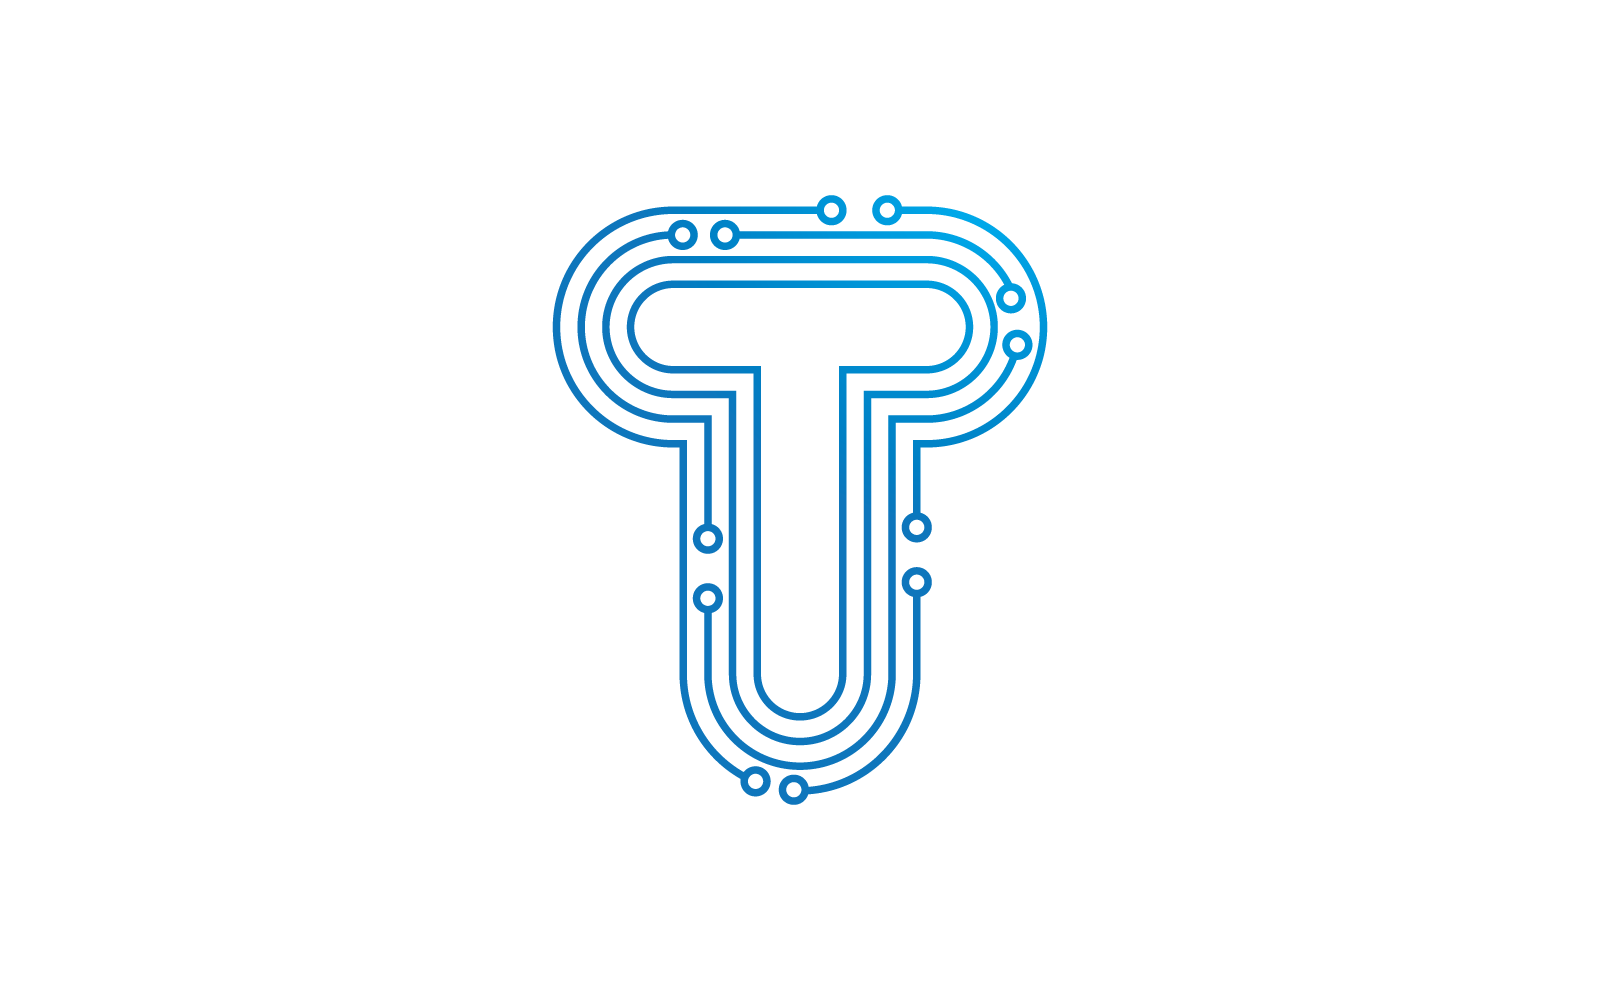 T initial letter Circuit technology illustration logo vector template